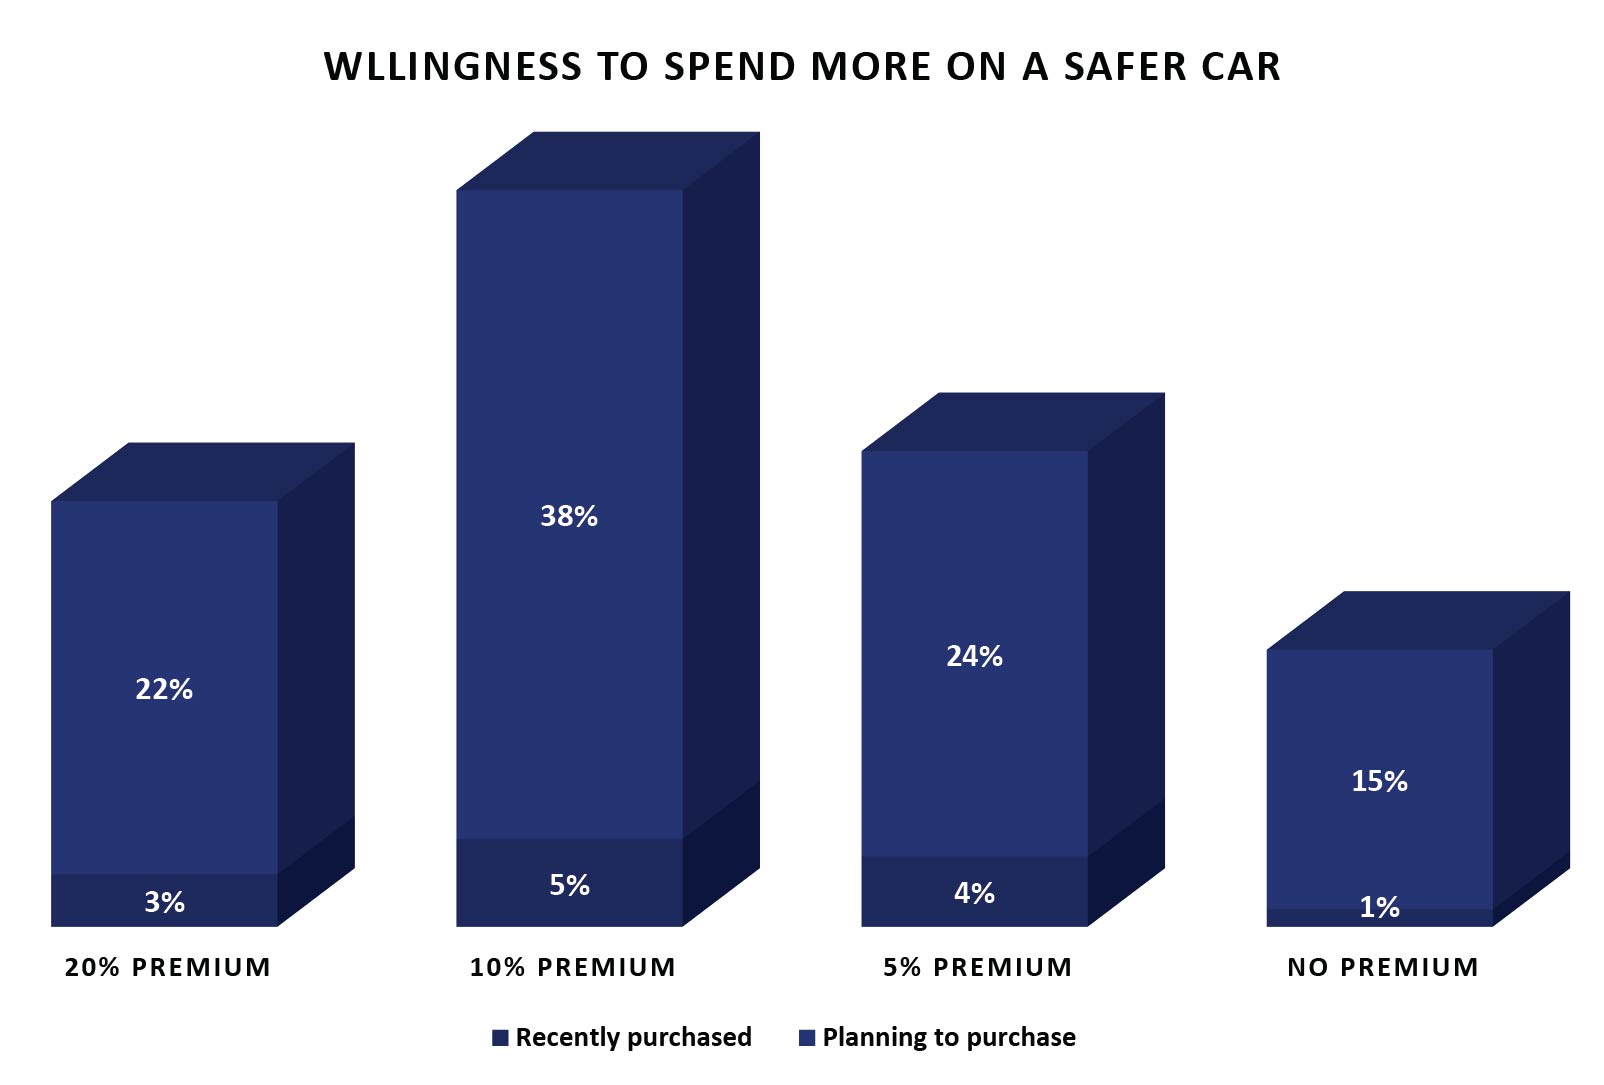 Willingness to spend more on a Safer Car